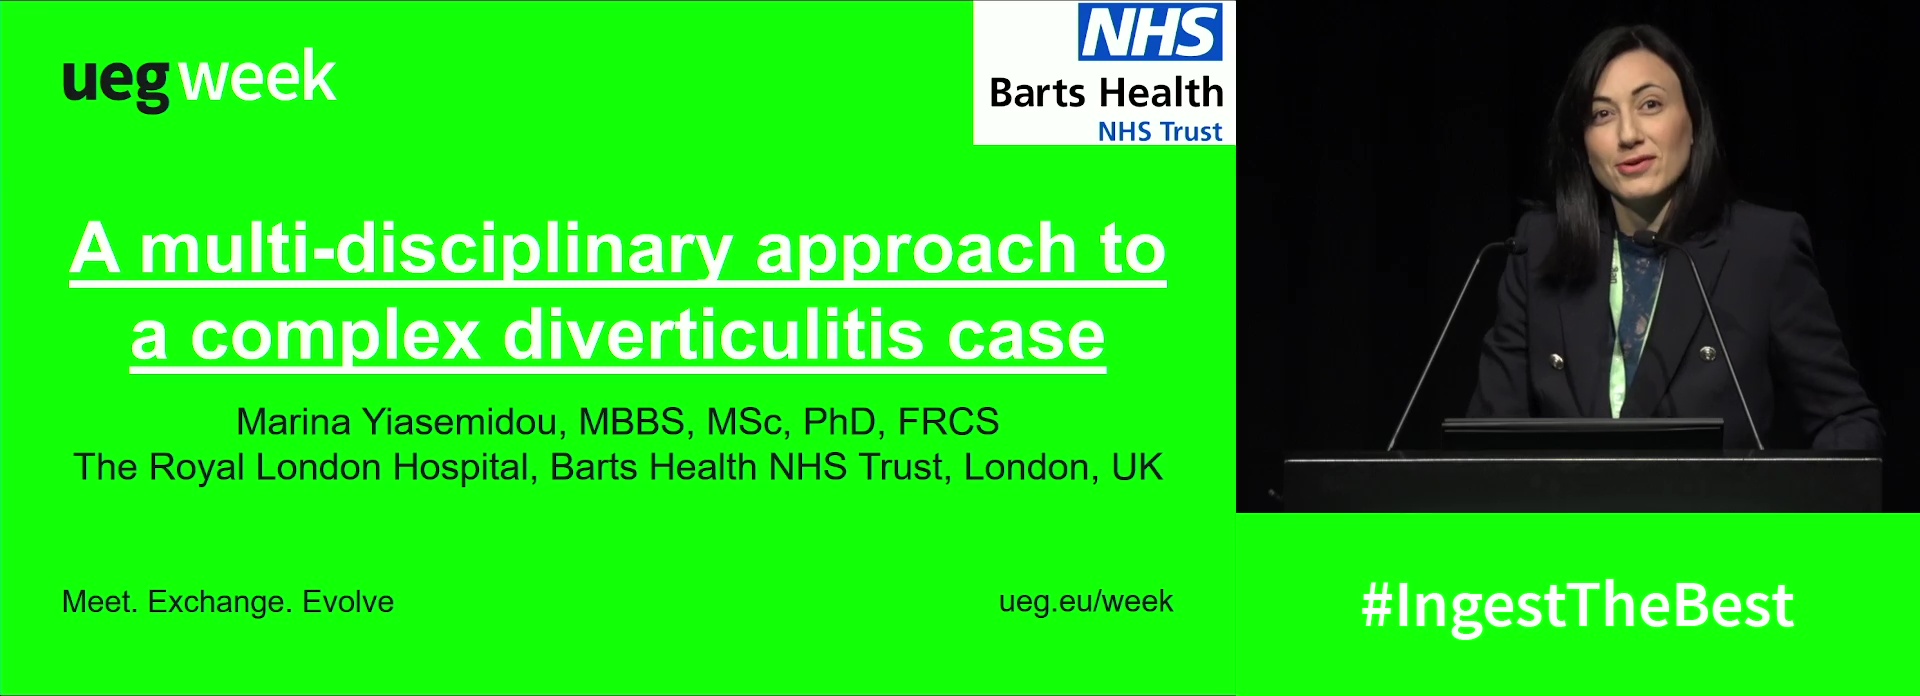 A multi-disciplinary approach for a complex diverticulitis